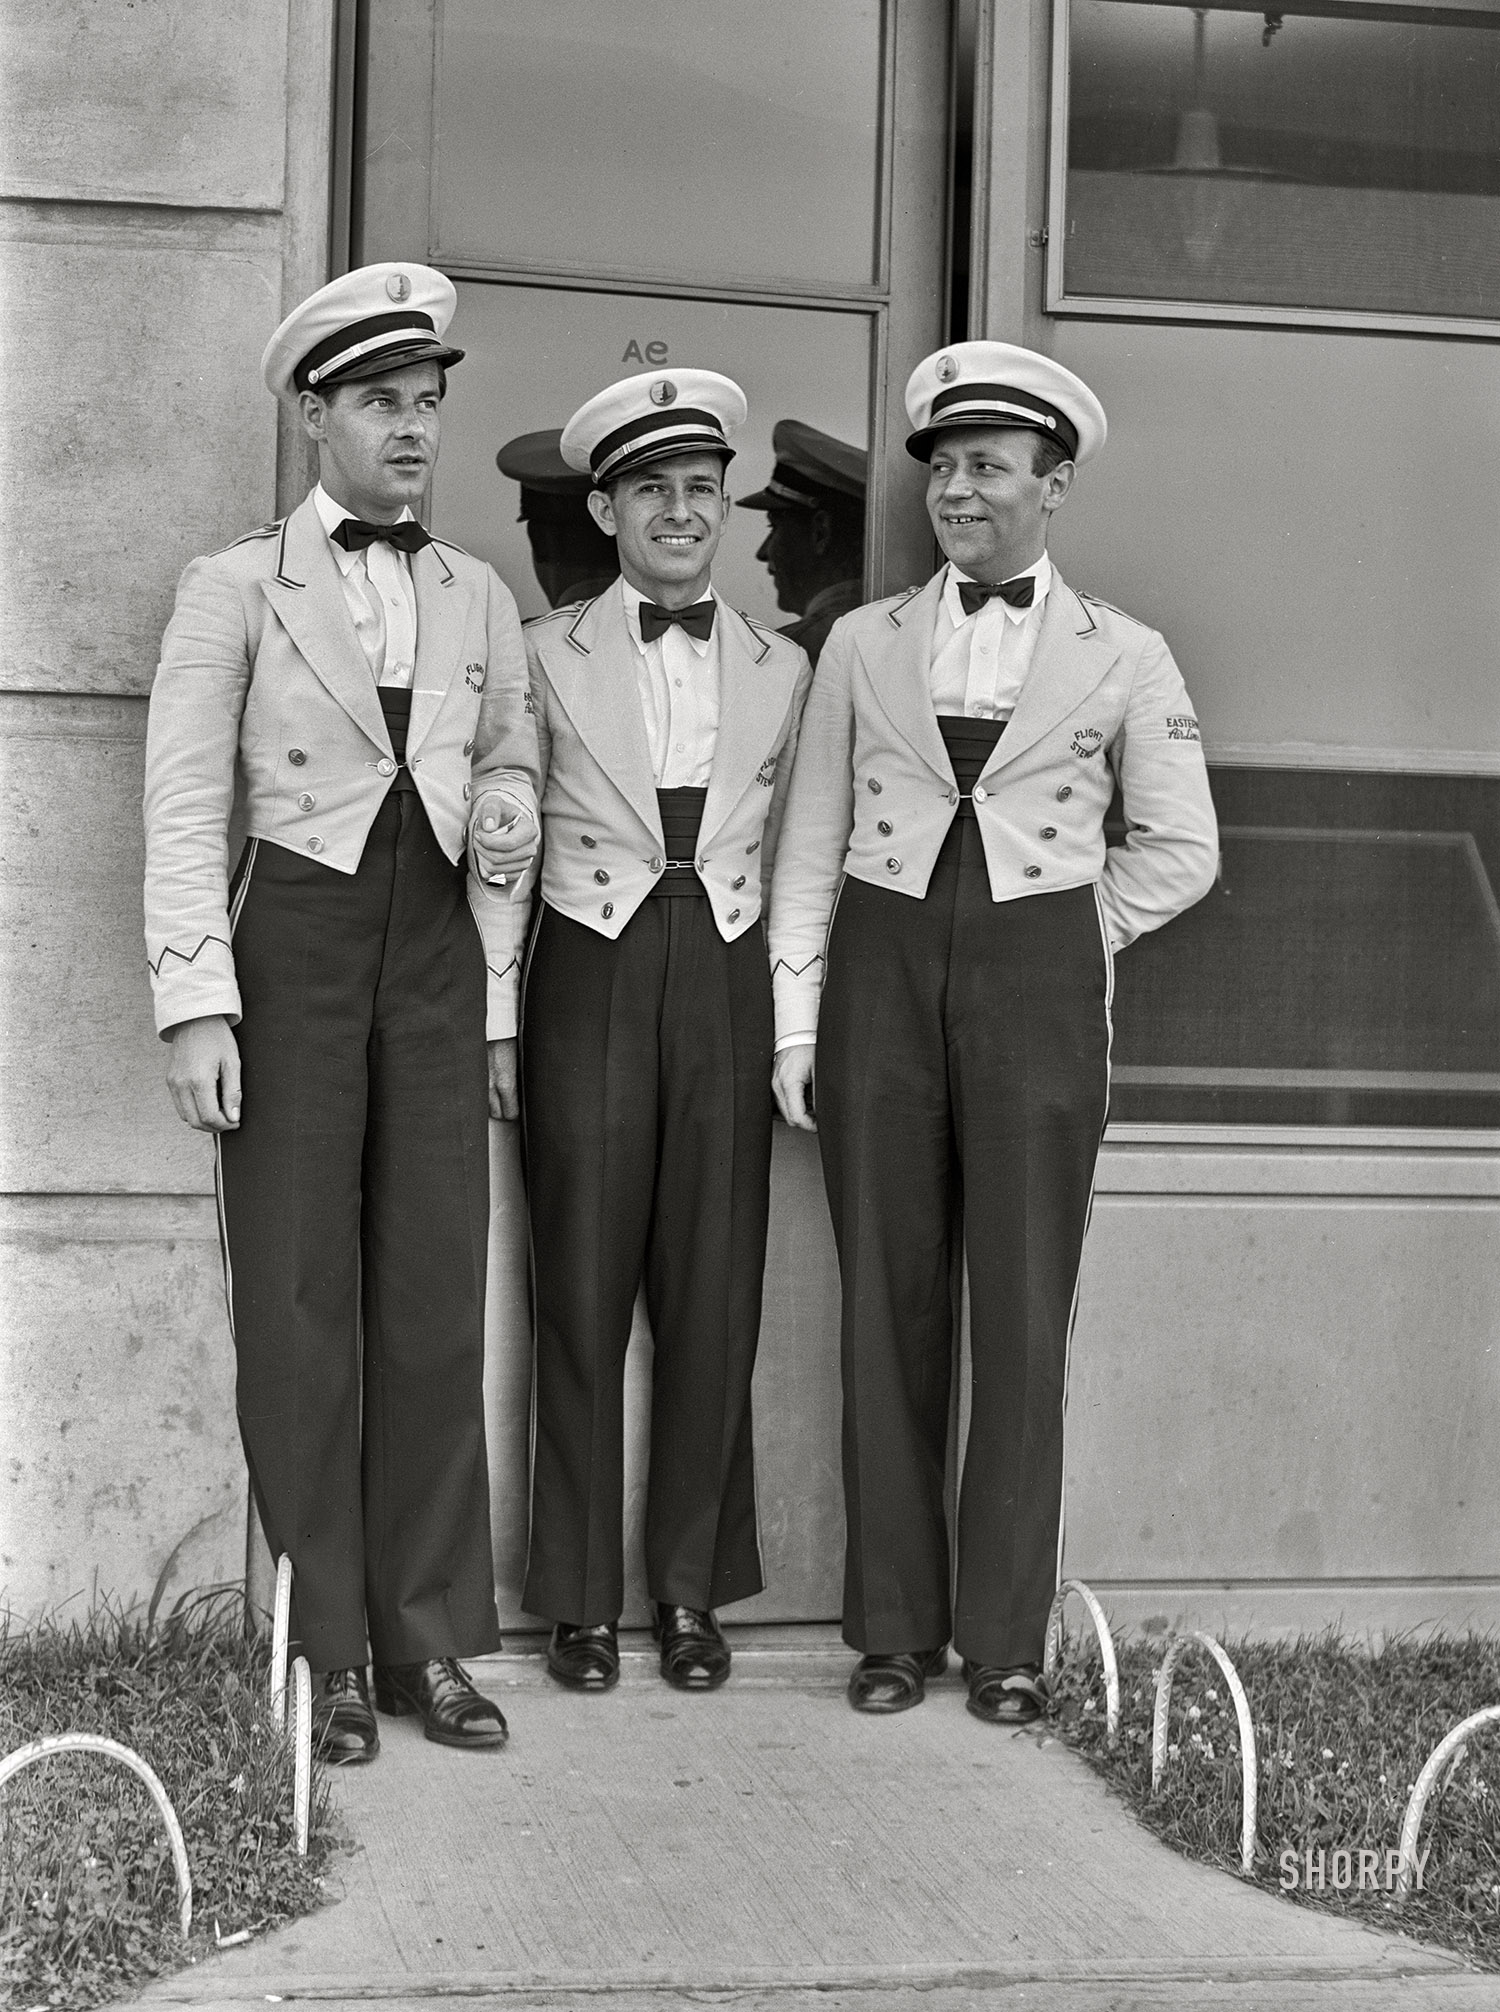 July 1941. "One of the airlines uses stewards, the other two use hostesses. Municipal airport, Washington, D.C." Medium format acetate negative by Jack Delano. View full size.